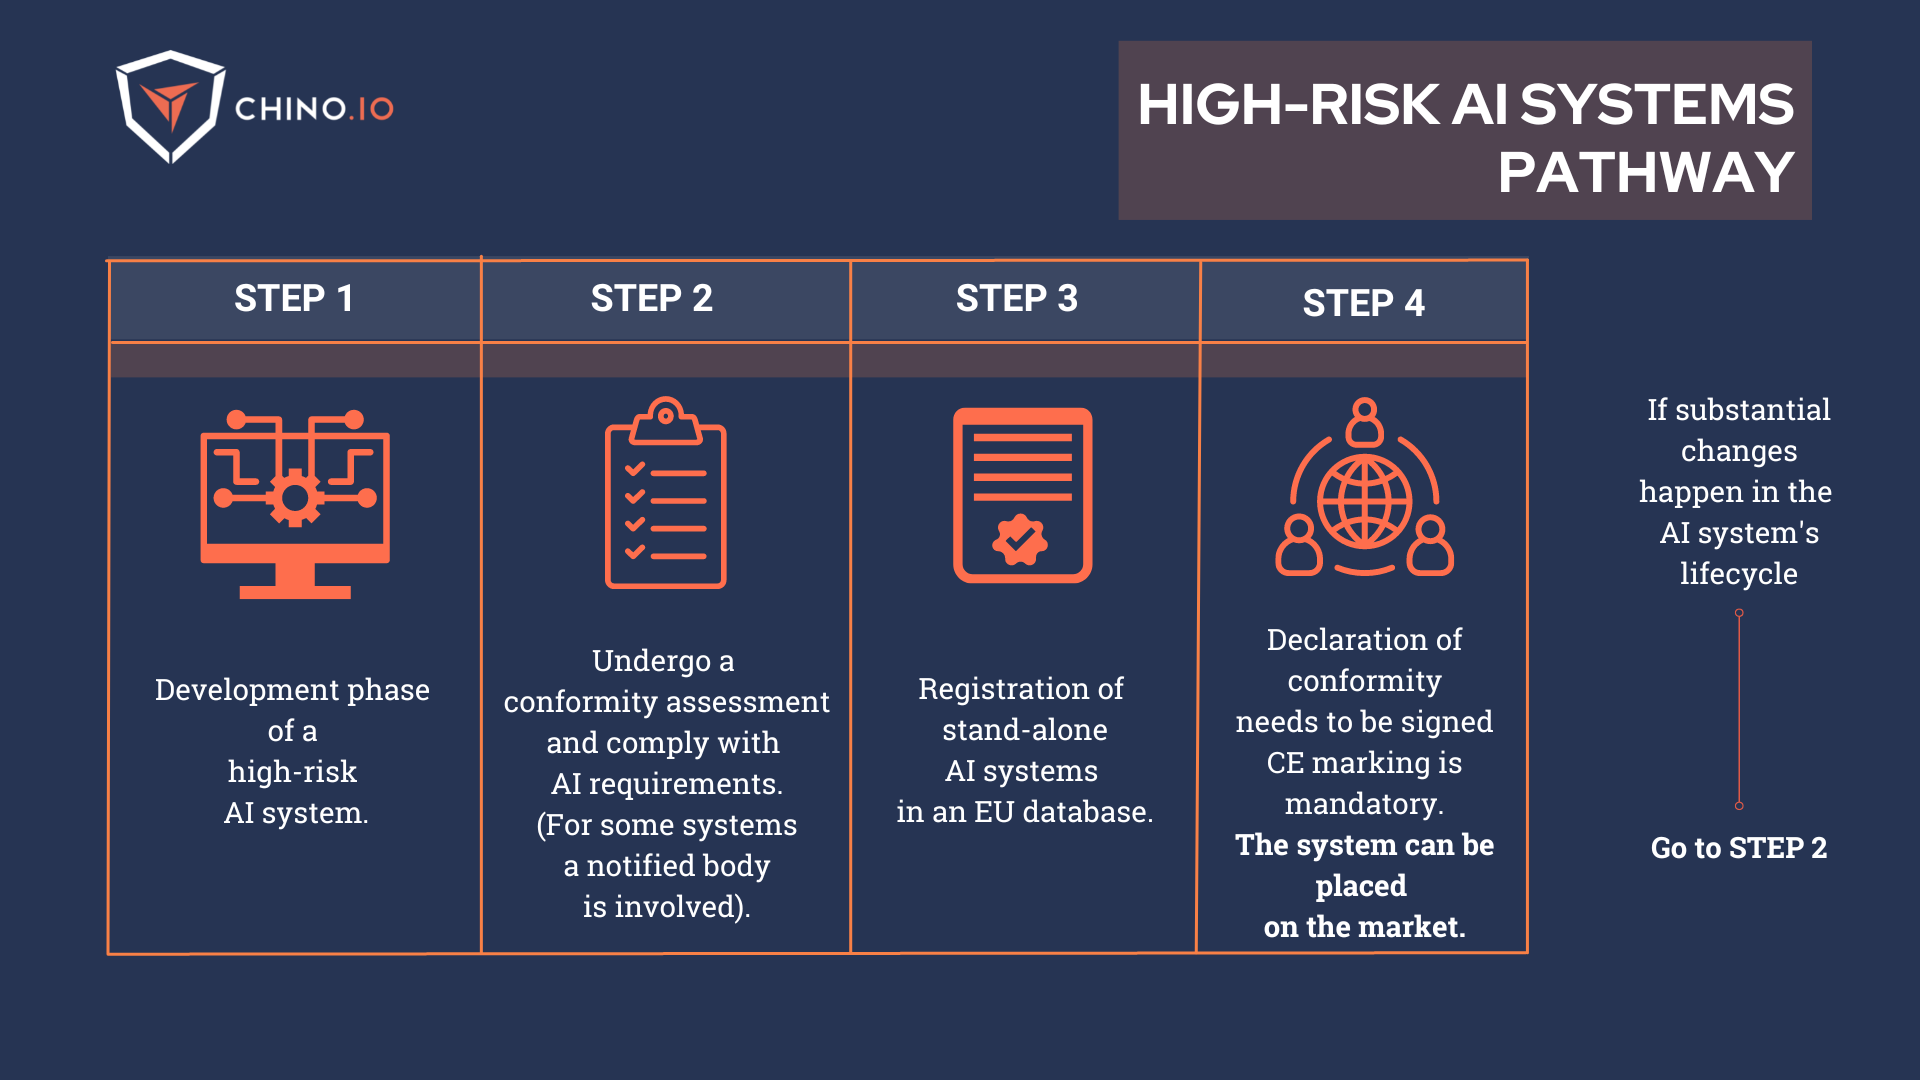 Scheme with a 4-step explanation about the high-risk AI system pathway of the AI Act